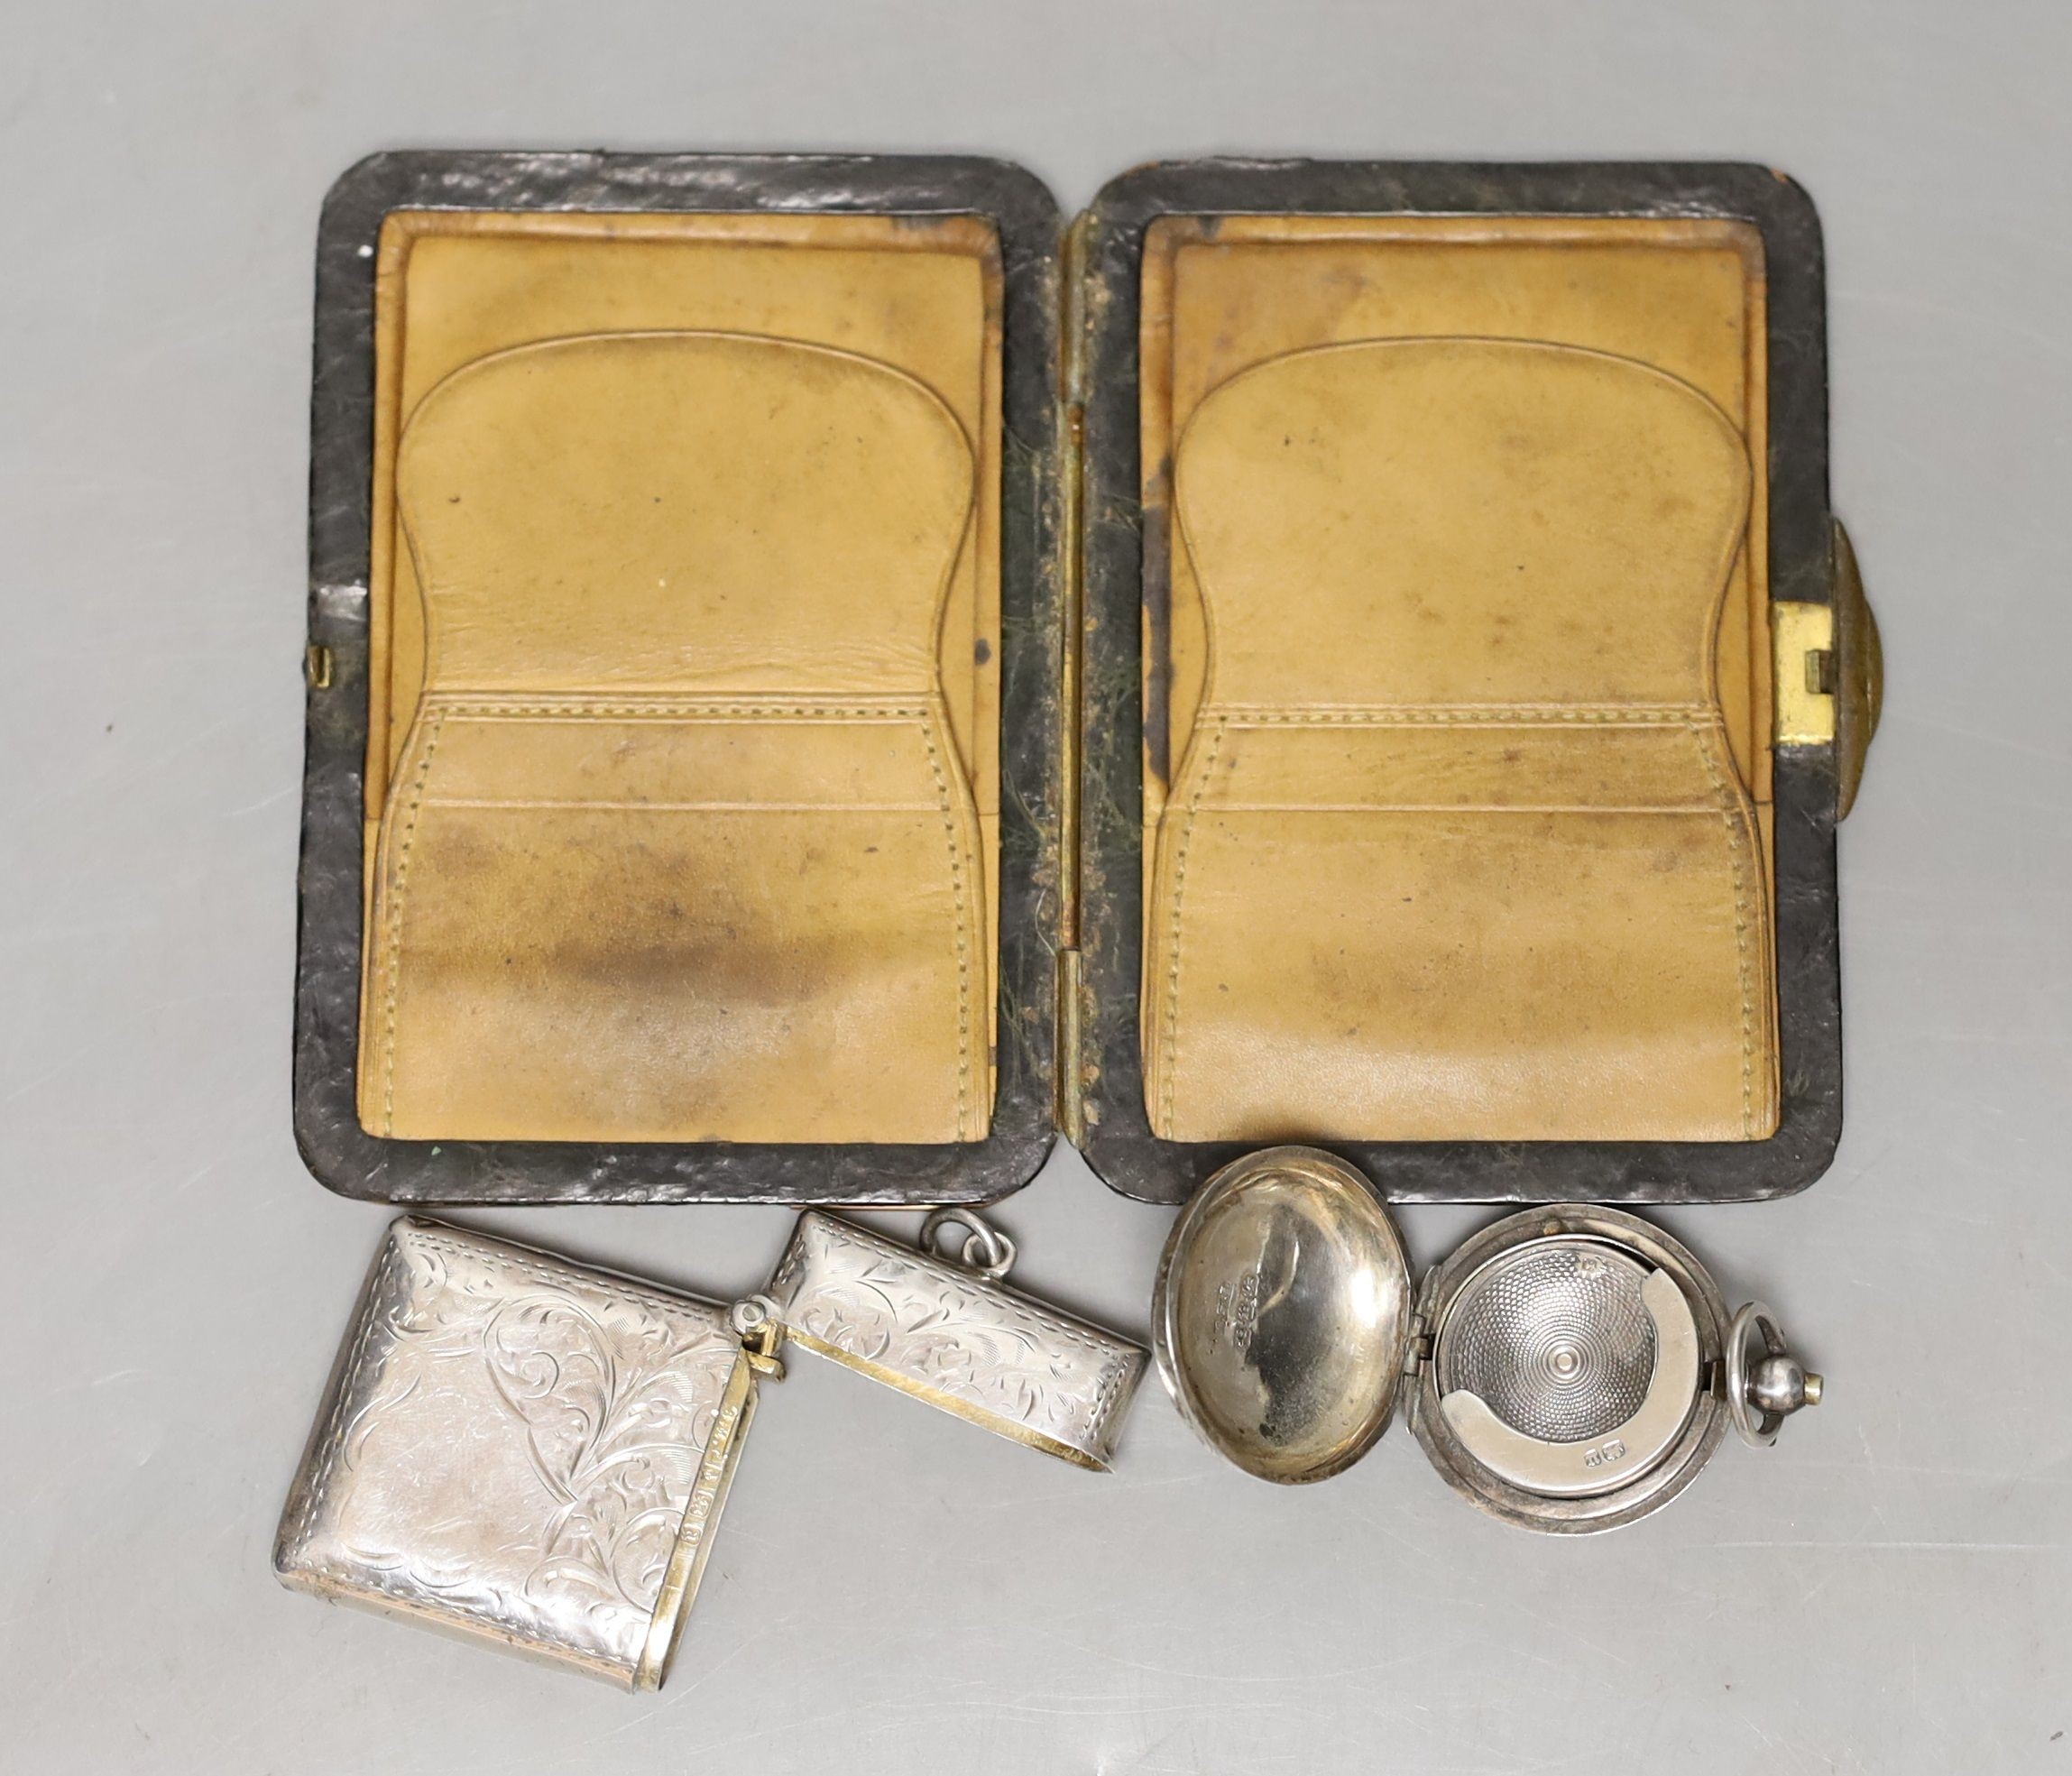 A late Victorian engraved silver sovereign case, a silver vesta case and an Edwardian 9ct gold mounted leather card purse.